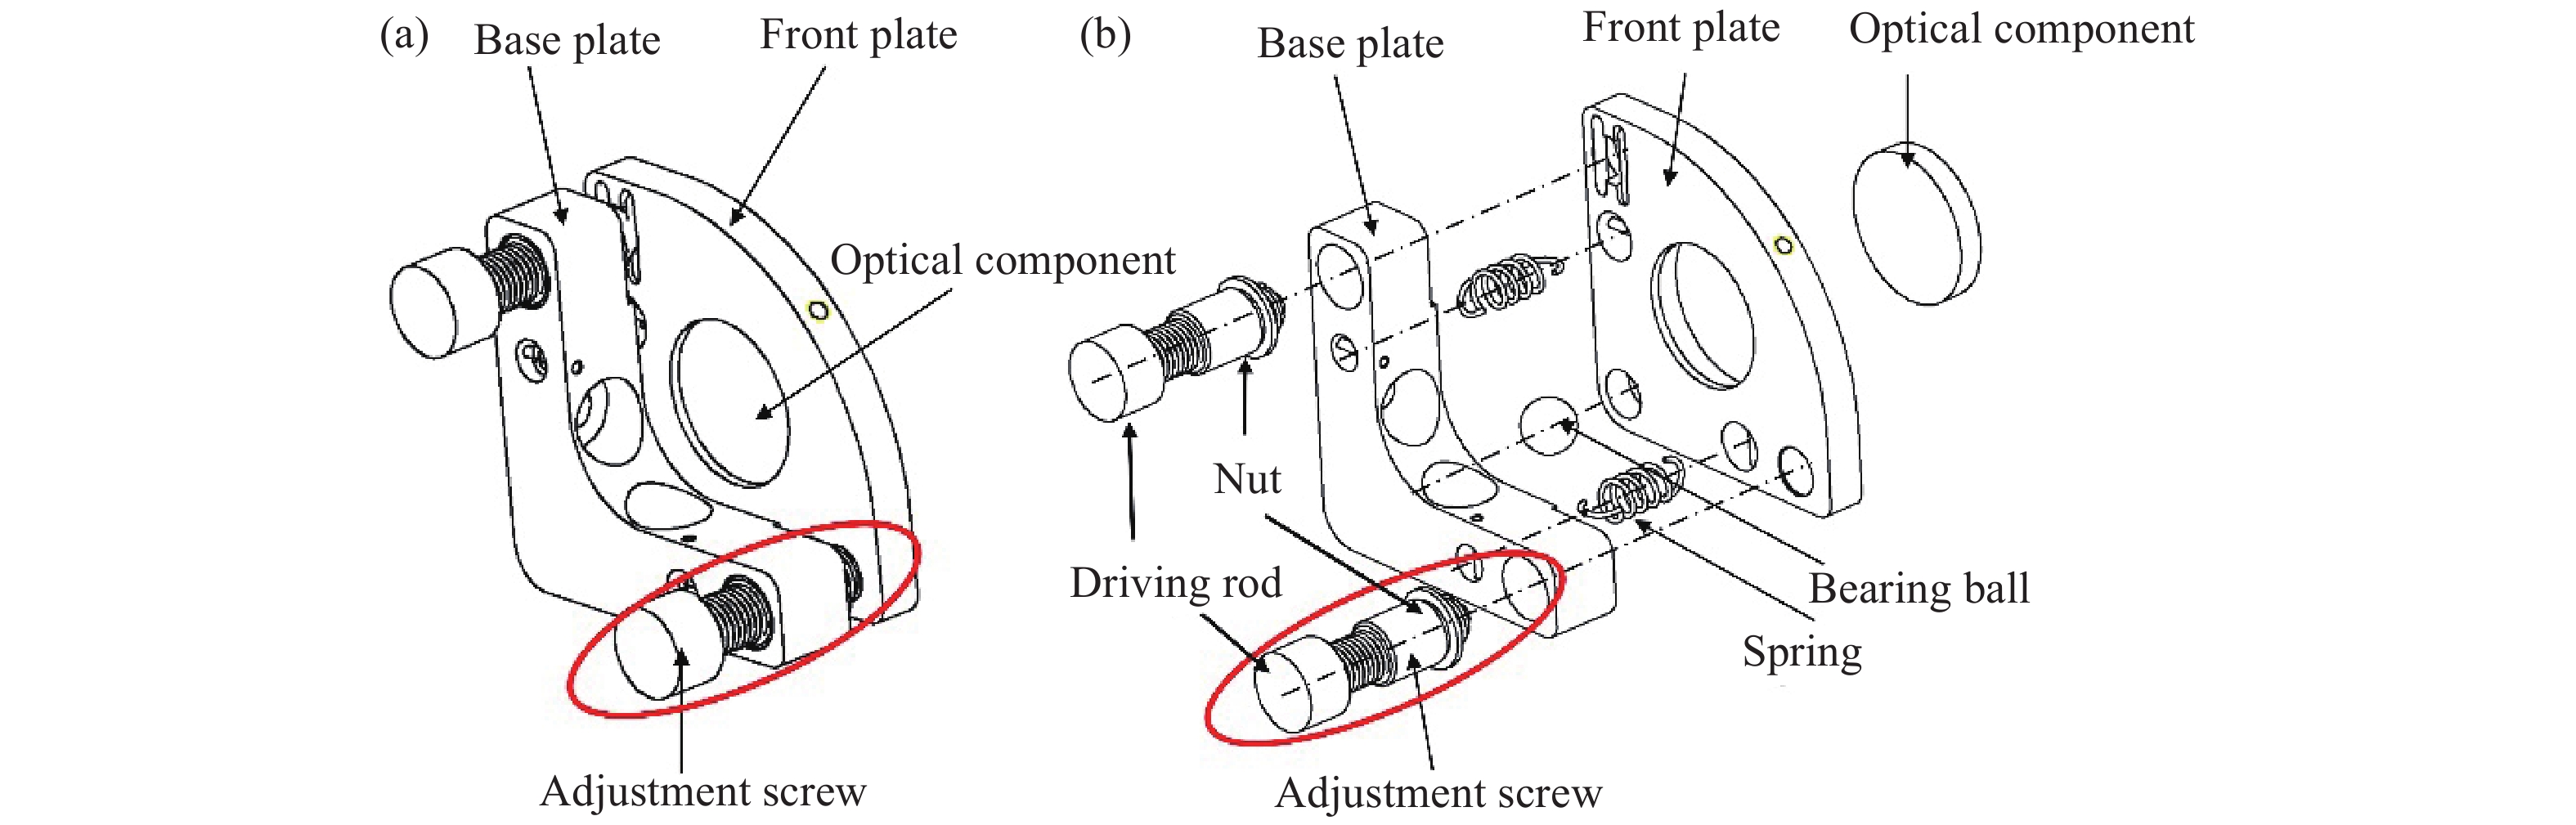 A common optical mount used in laser system. (a) Oblique view; (b) Exploded view